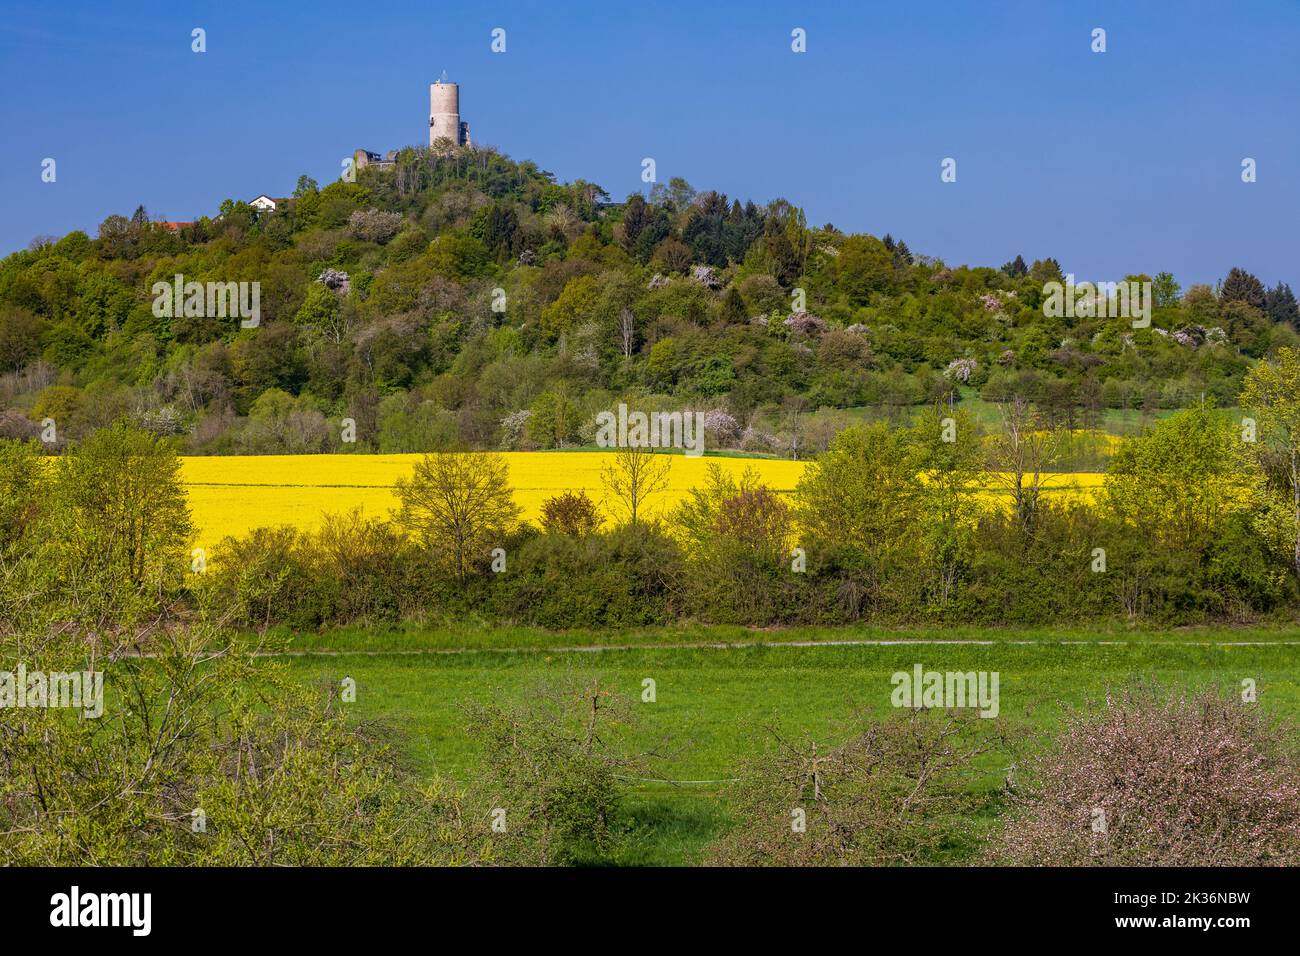 remains of Vetzberg castle on top of Vetzberg hill, an extinct volcano, surrounded by spring landscape and rape fields in Biebertal, Hesse, Germany Stock Photo